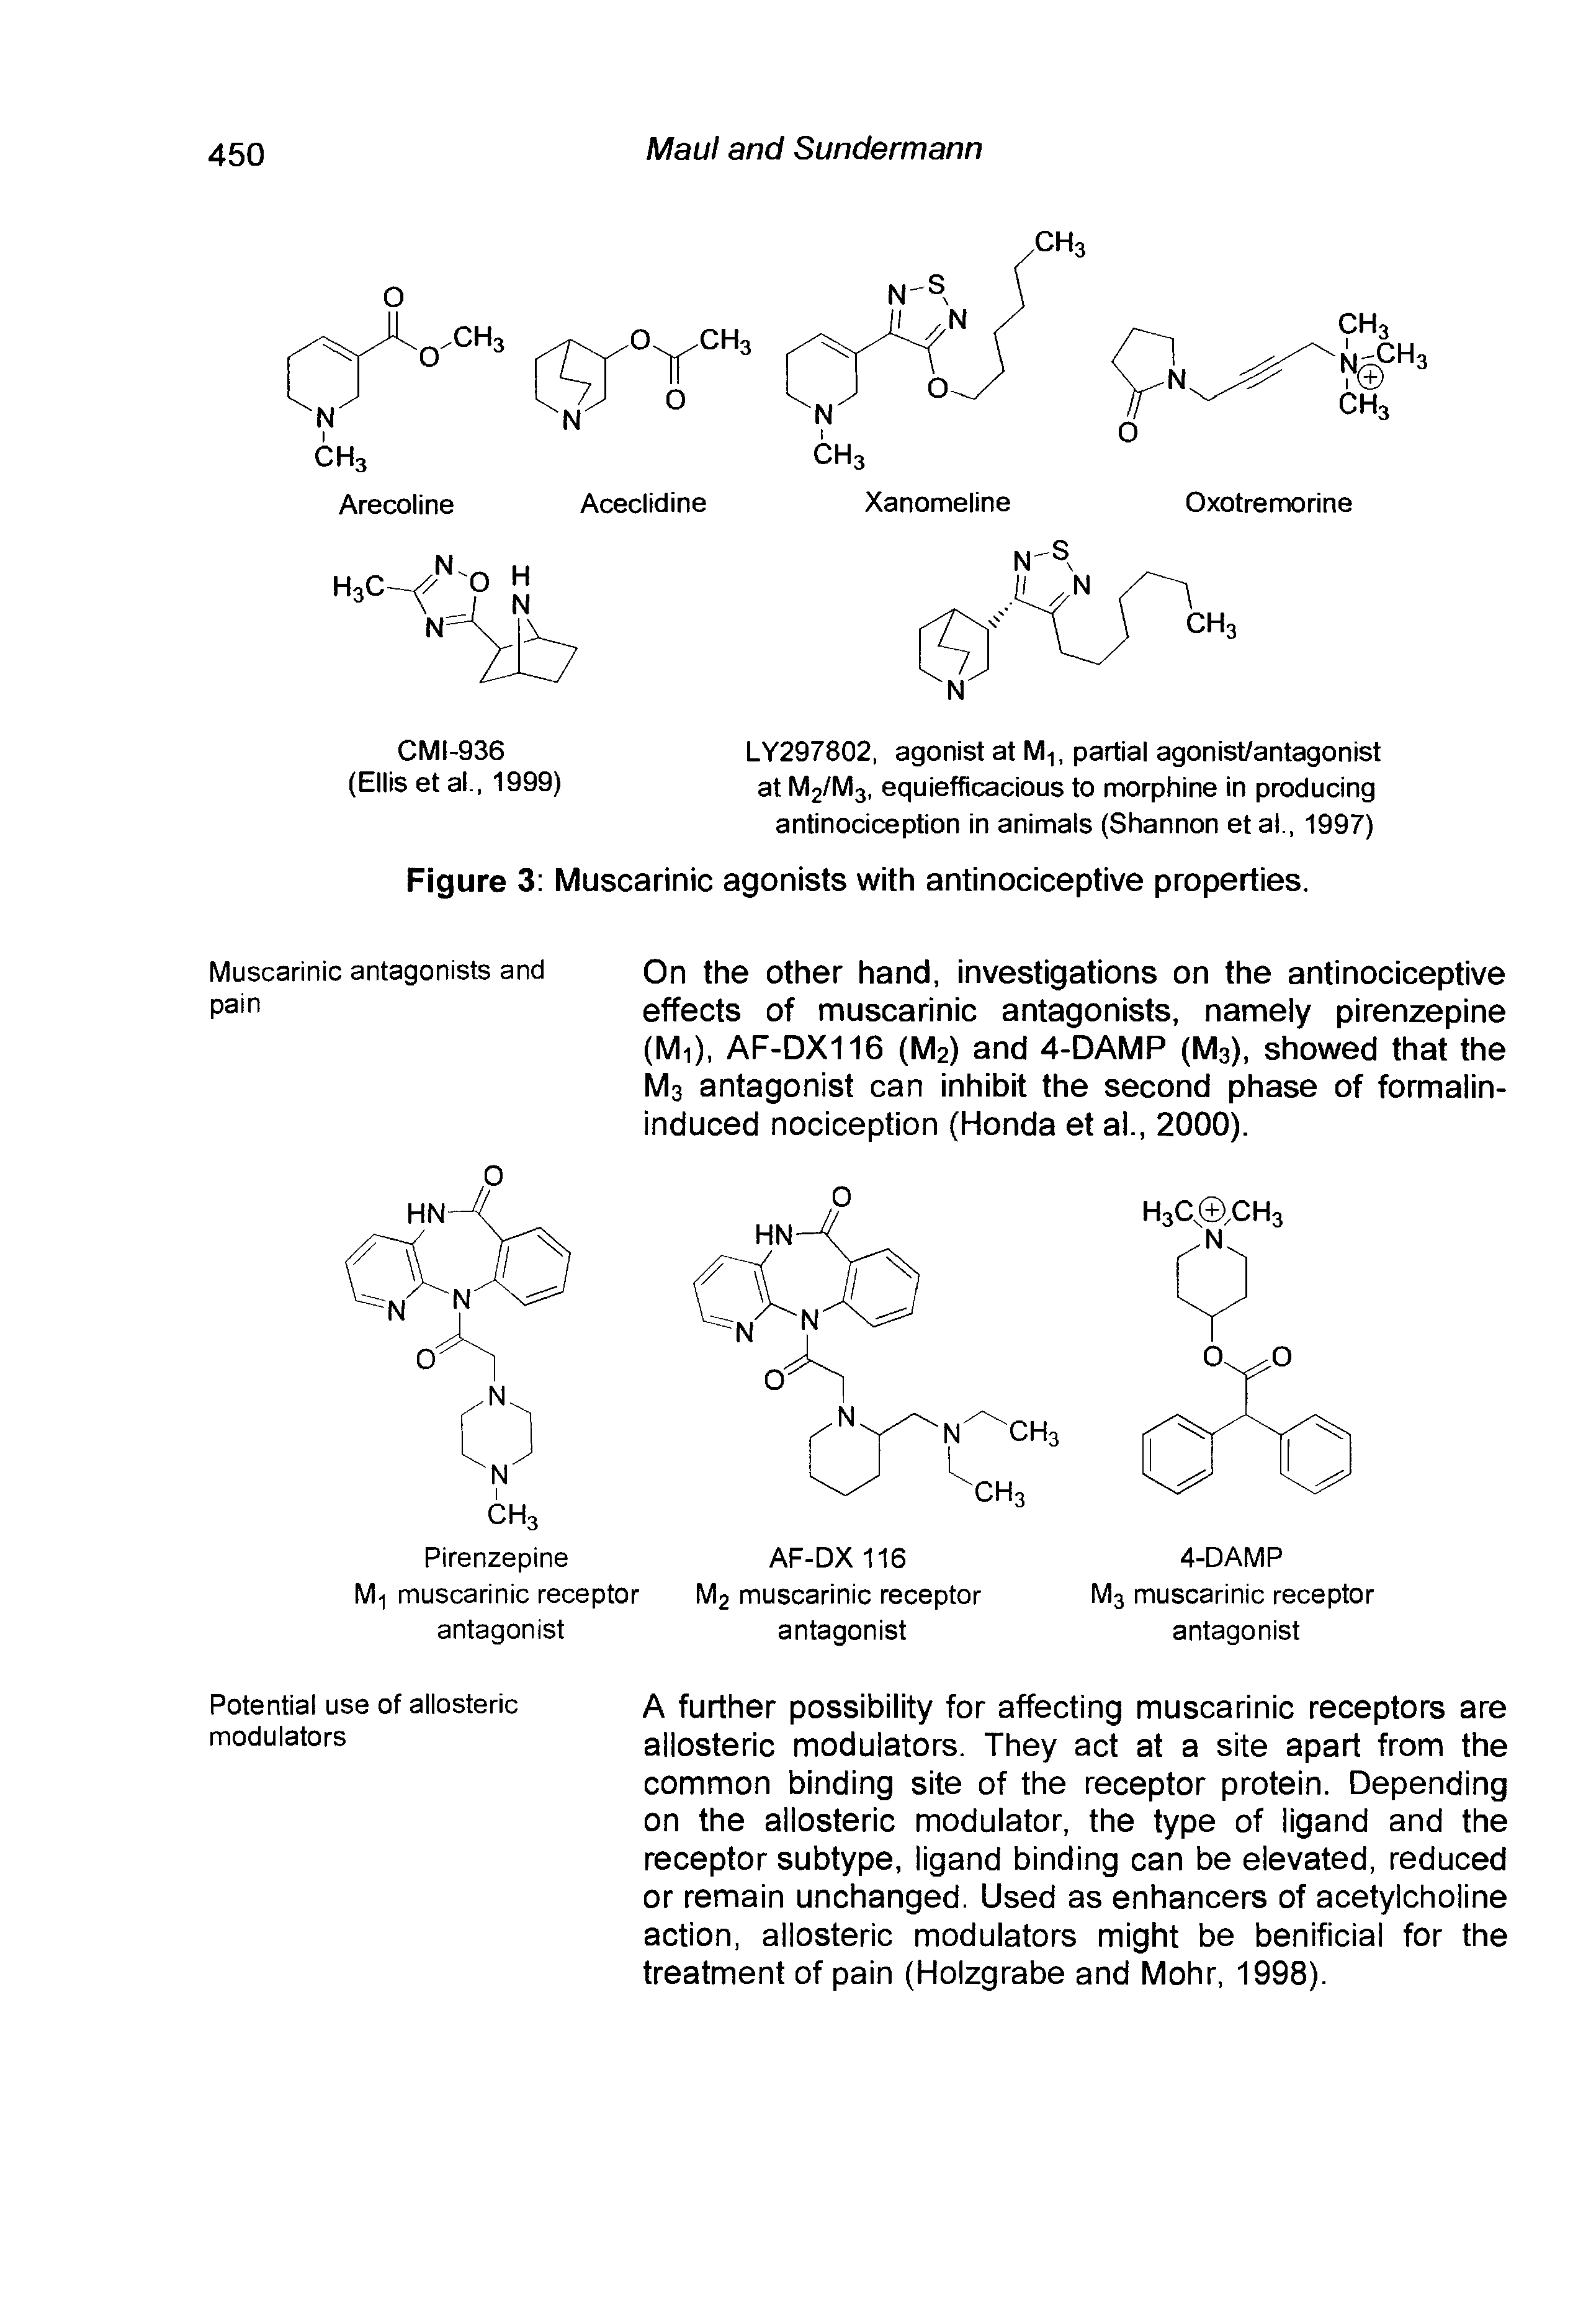 Figure 3 Muscarinic agonists with antinociceptive properties.